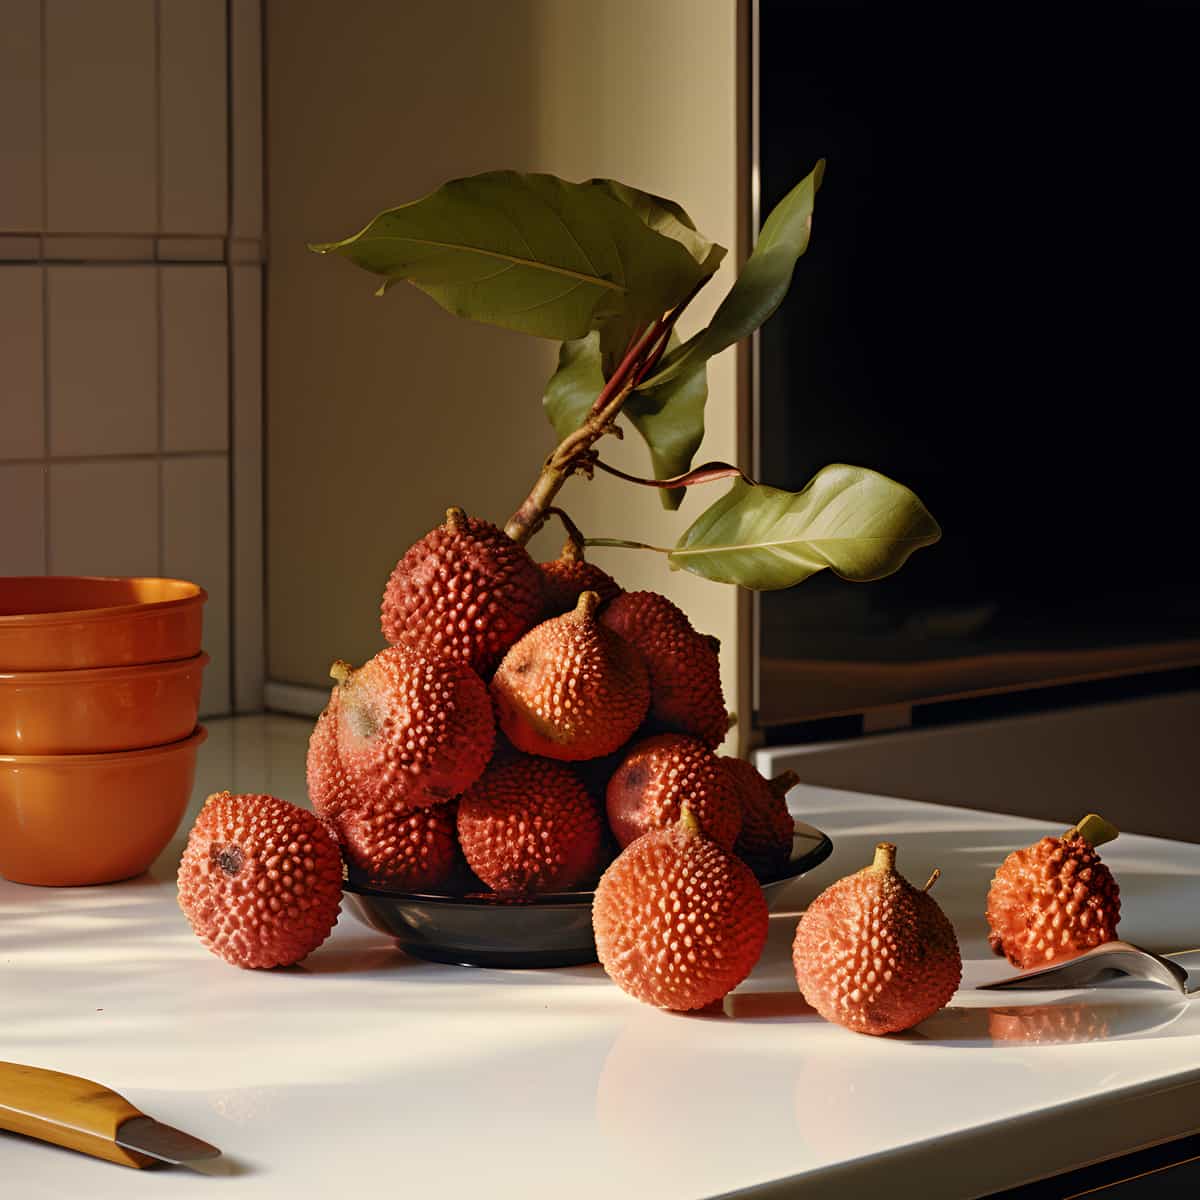 Bacuri Fruit on a kitchen counter